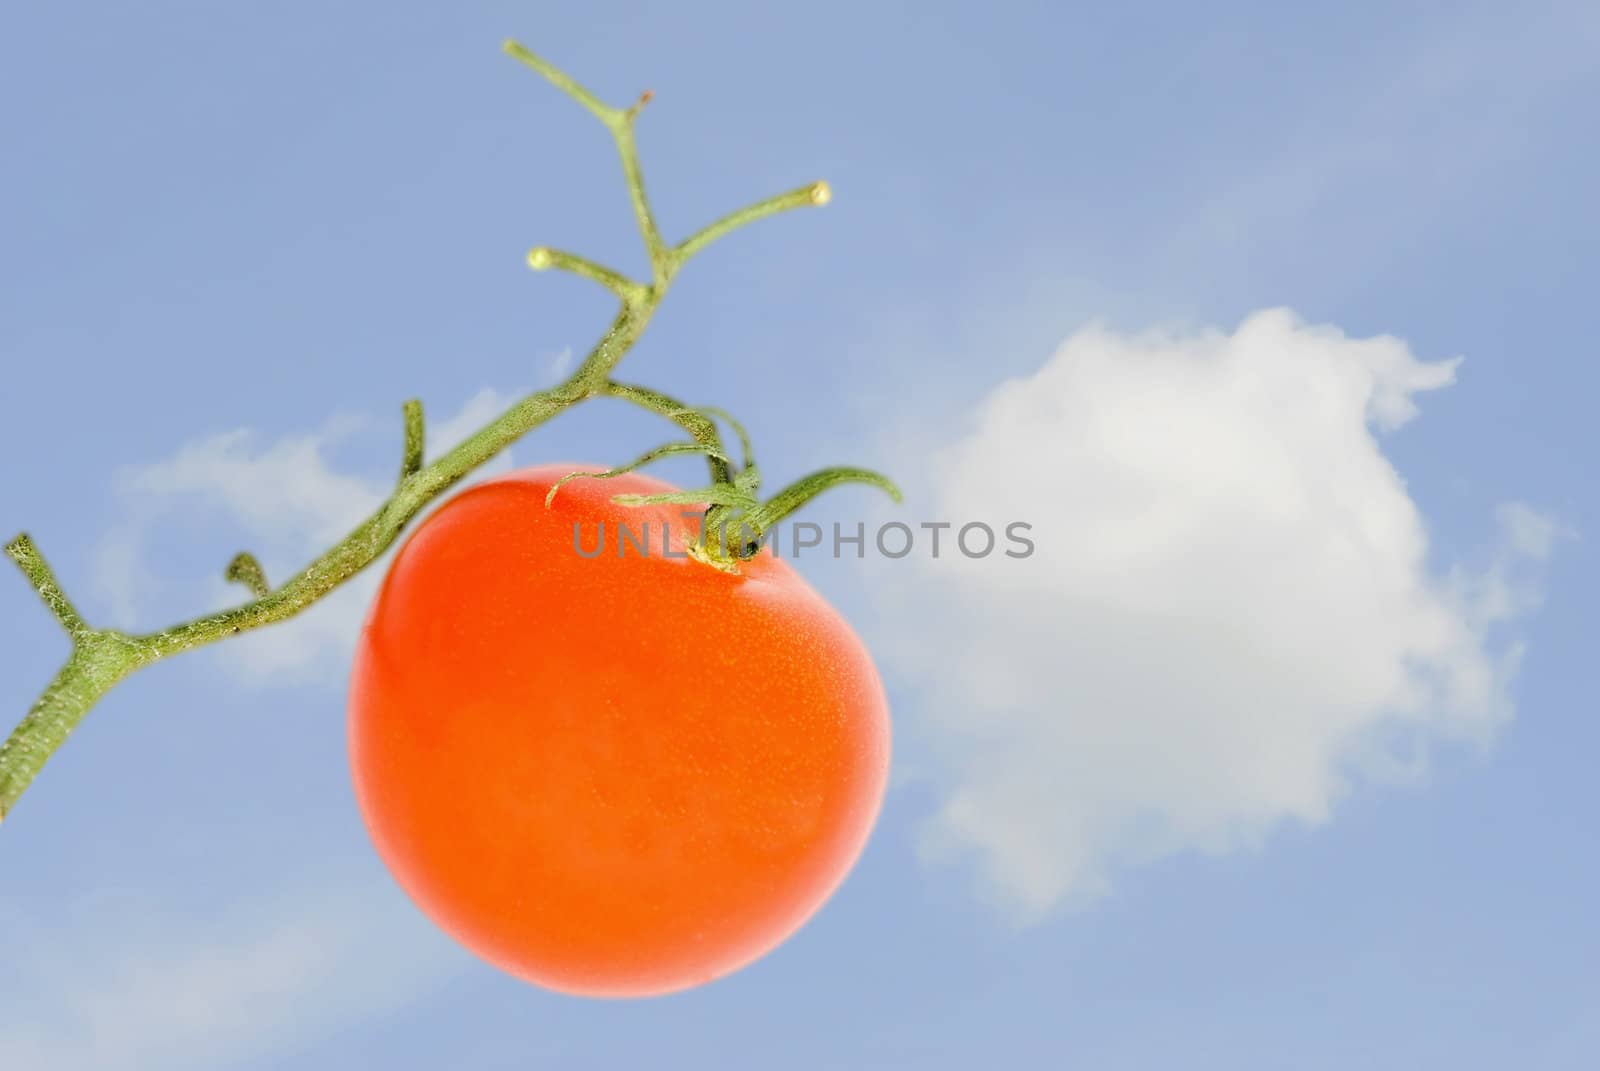 The red tomato and green branch on a background of clouds